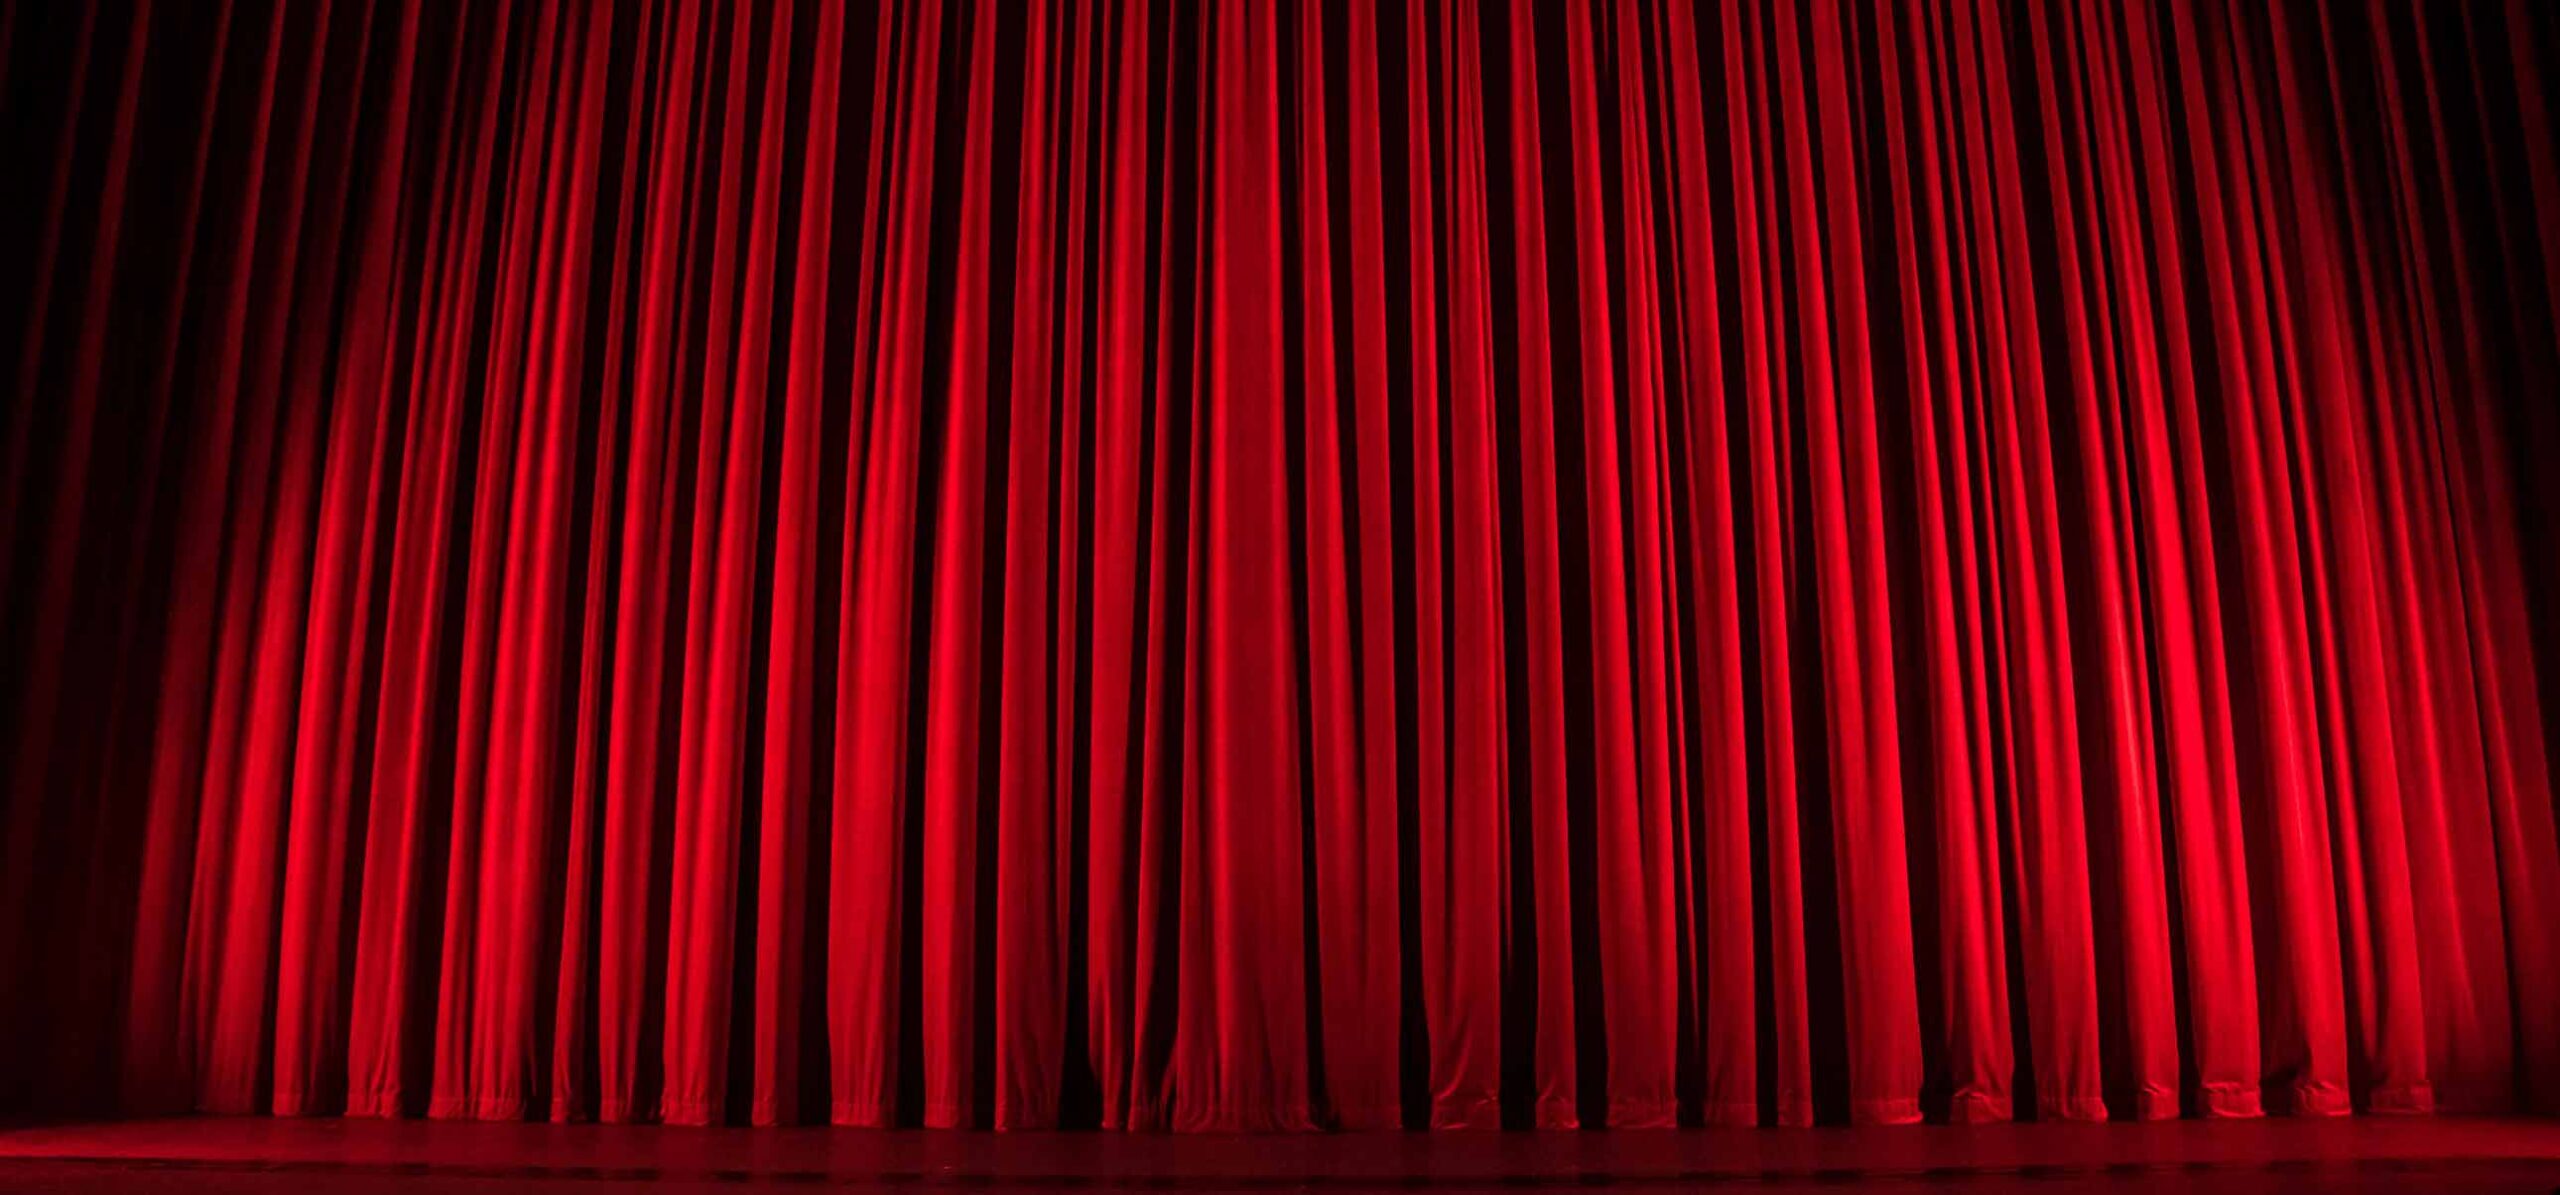 Red curtain across a stage.